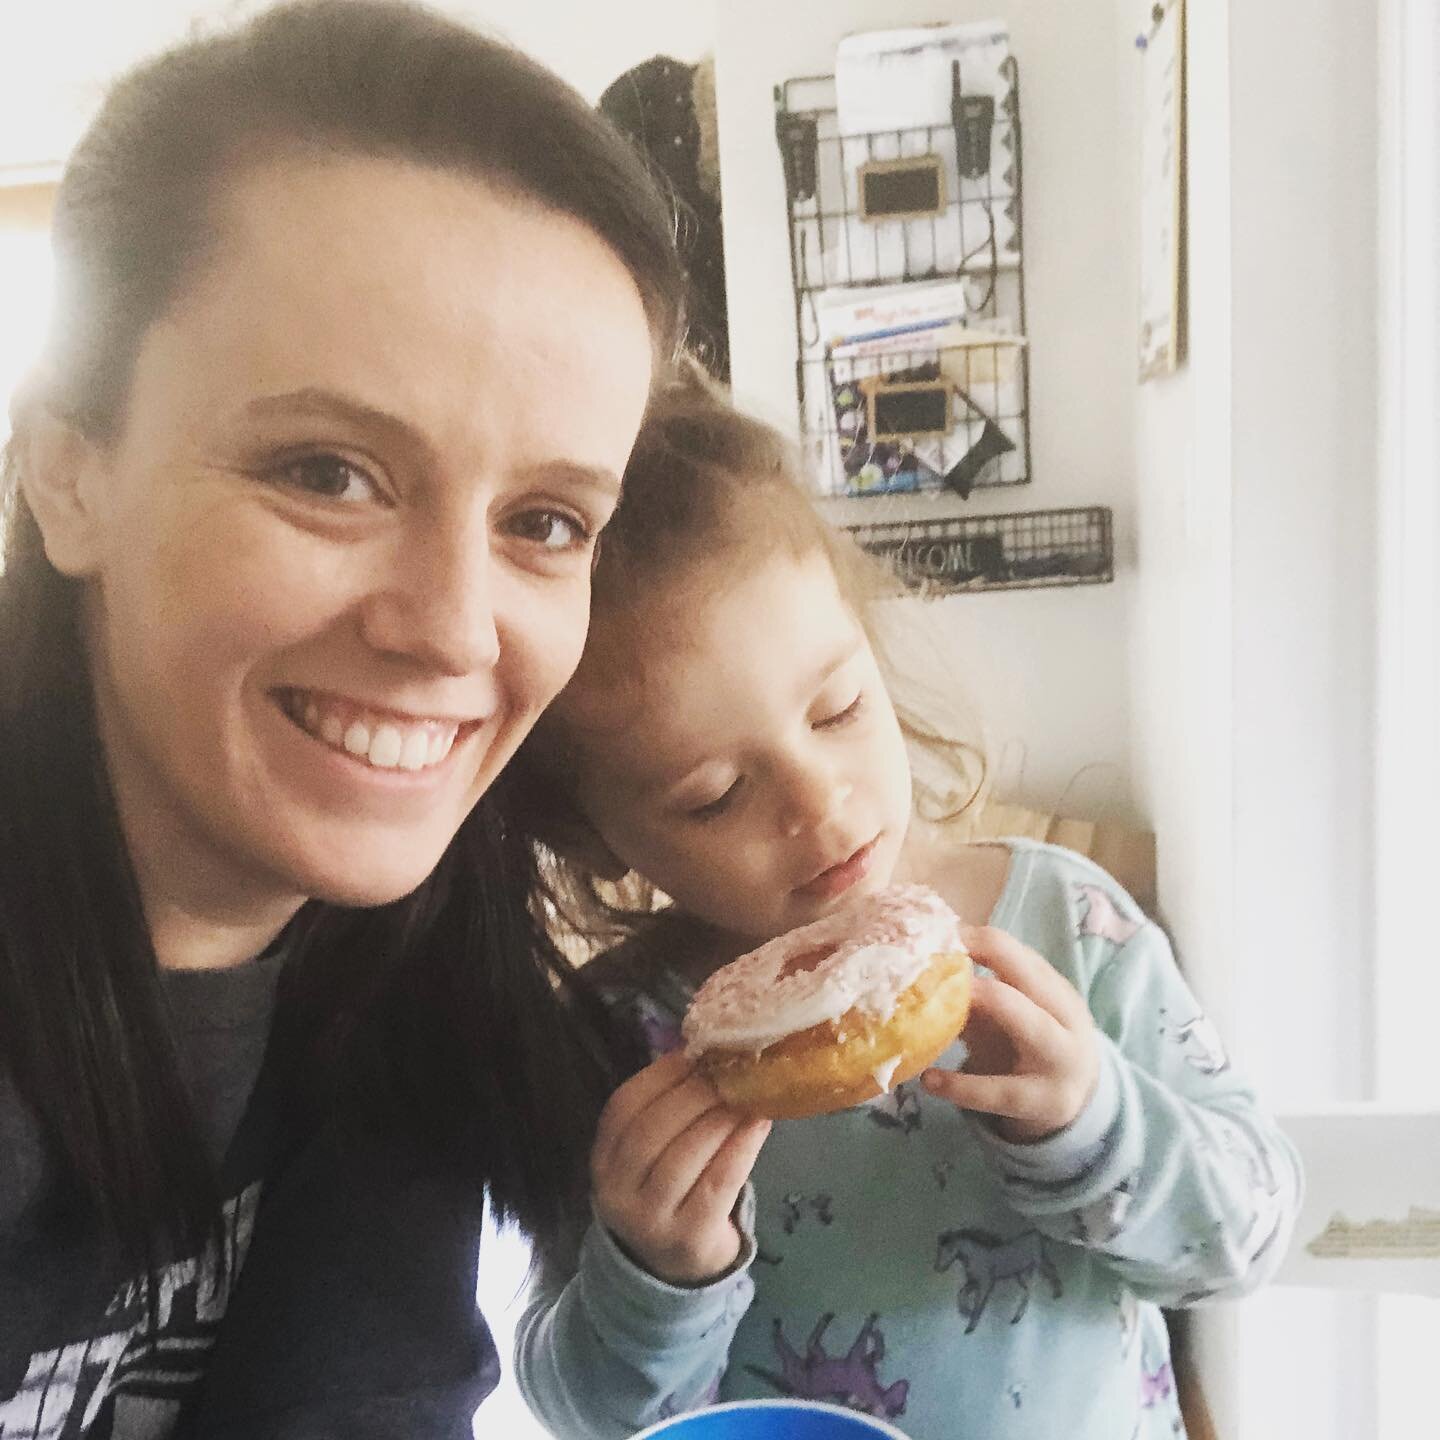 Do you look at donuts like my little one does, but feel like you have to restrict them to lose weight?⁠⁠
⁠⁠
Ladies! You don't have to restrict your favorite foods just to lose weight. The more you include all foods into your daily meals and focus on 